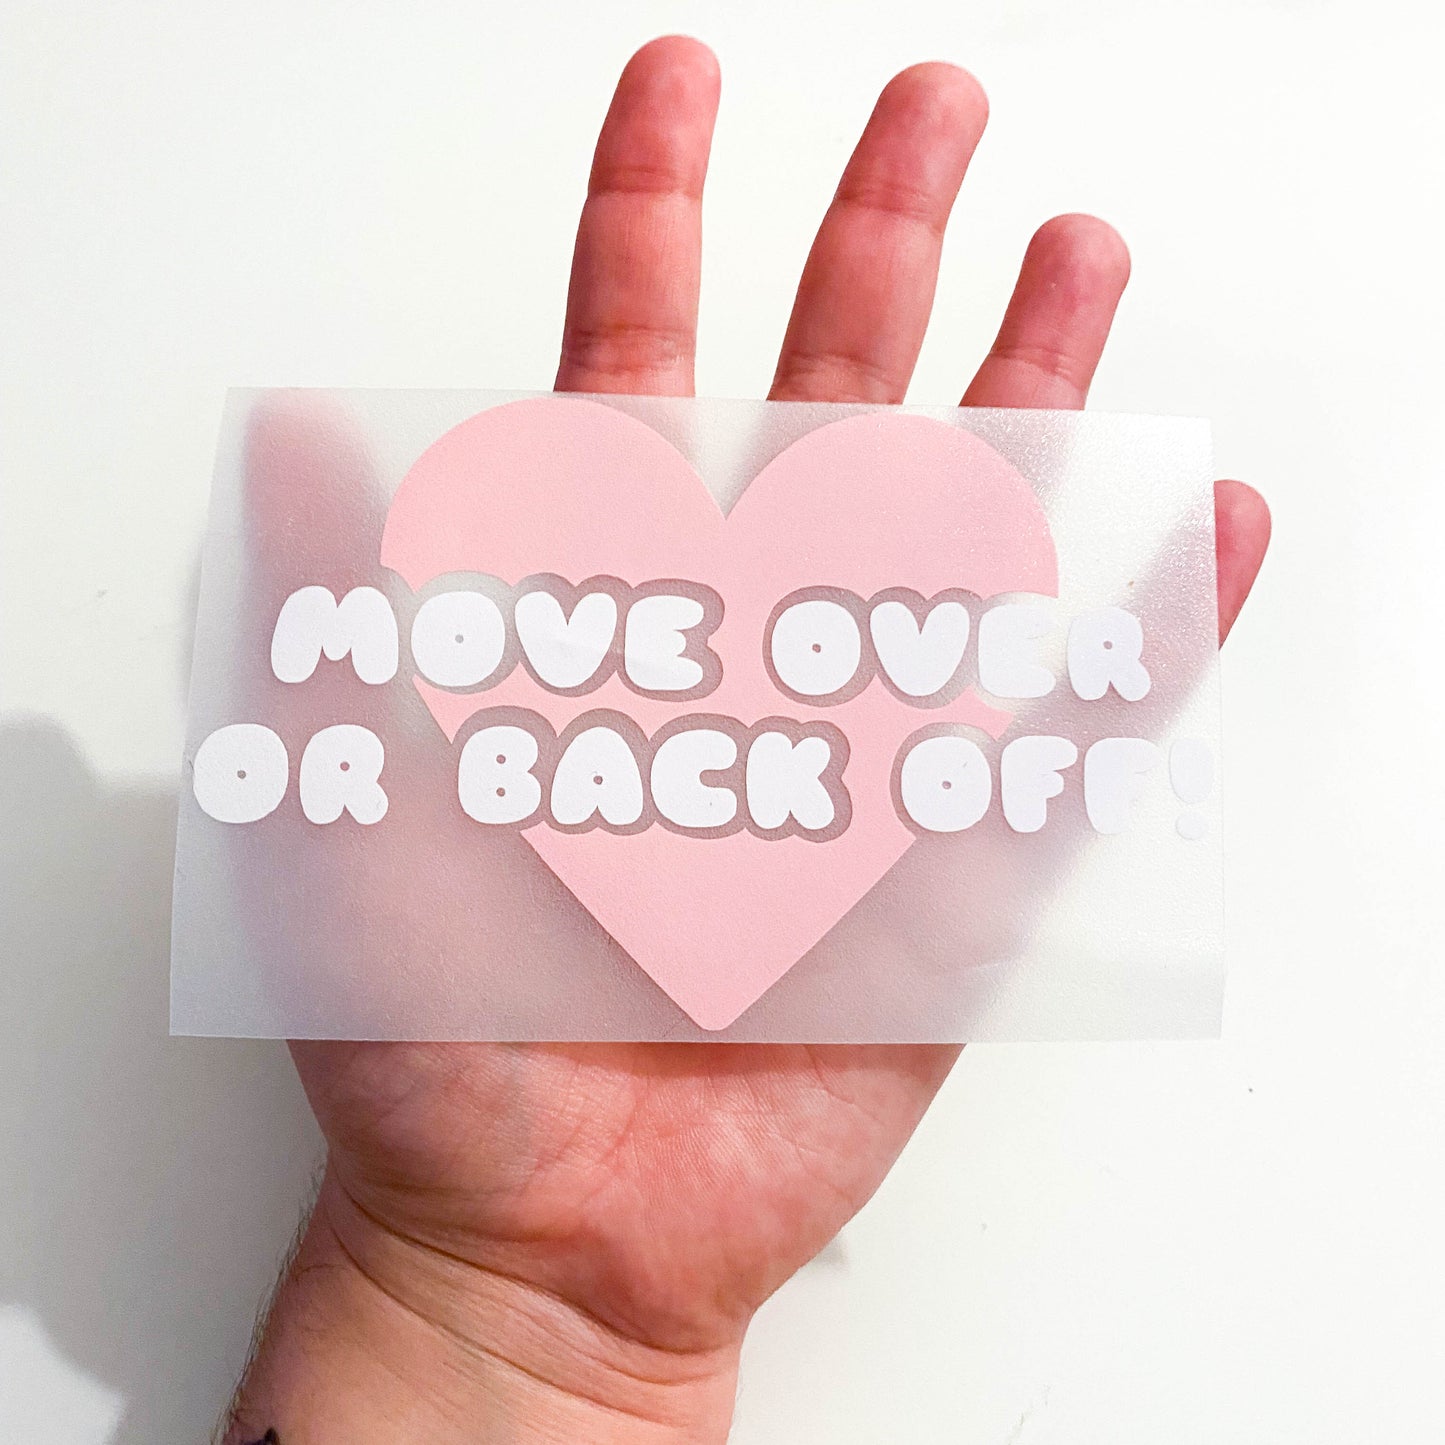 Move Over or Back Off Heart Decal